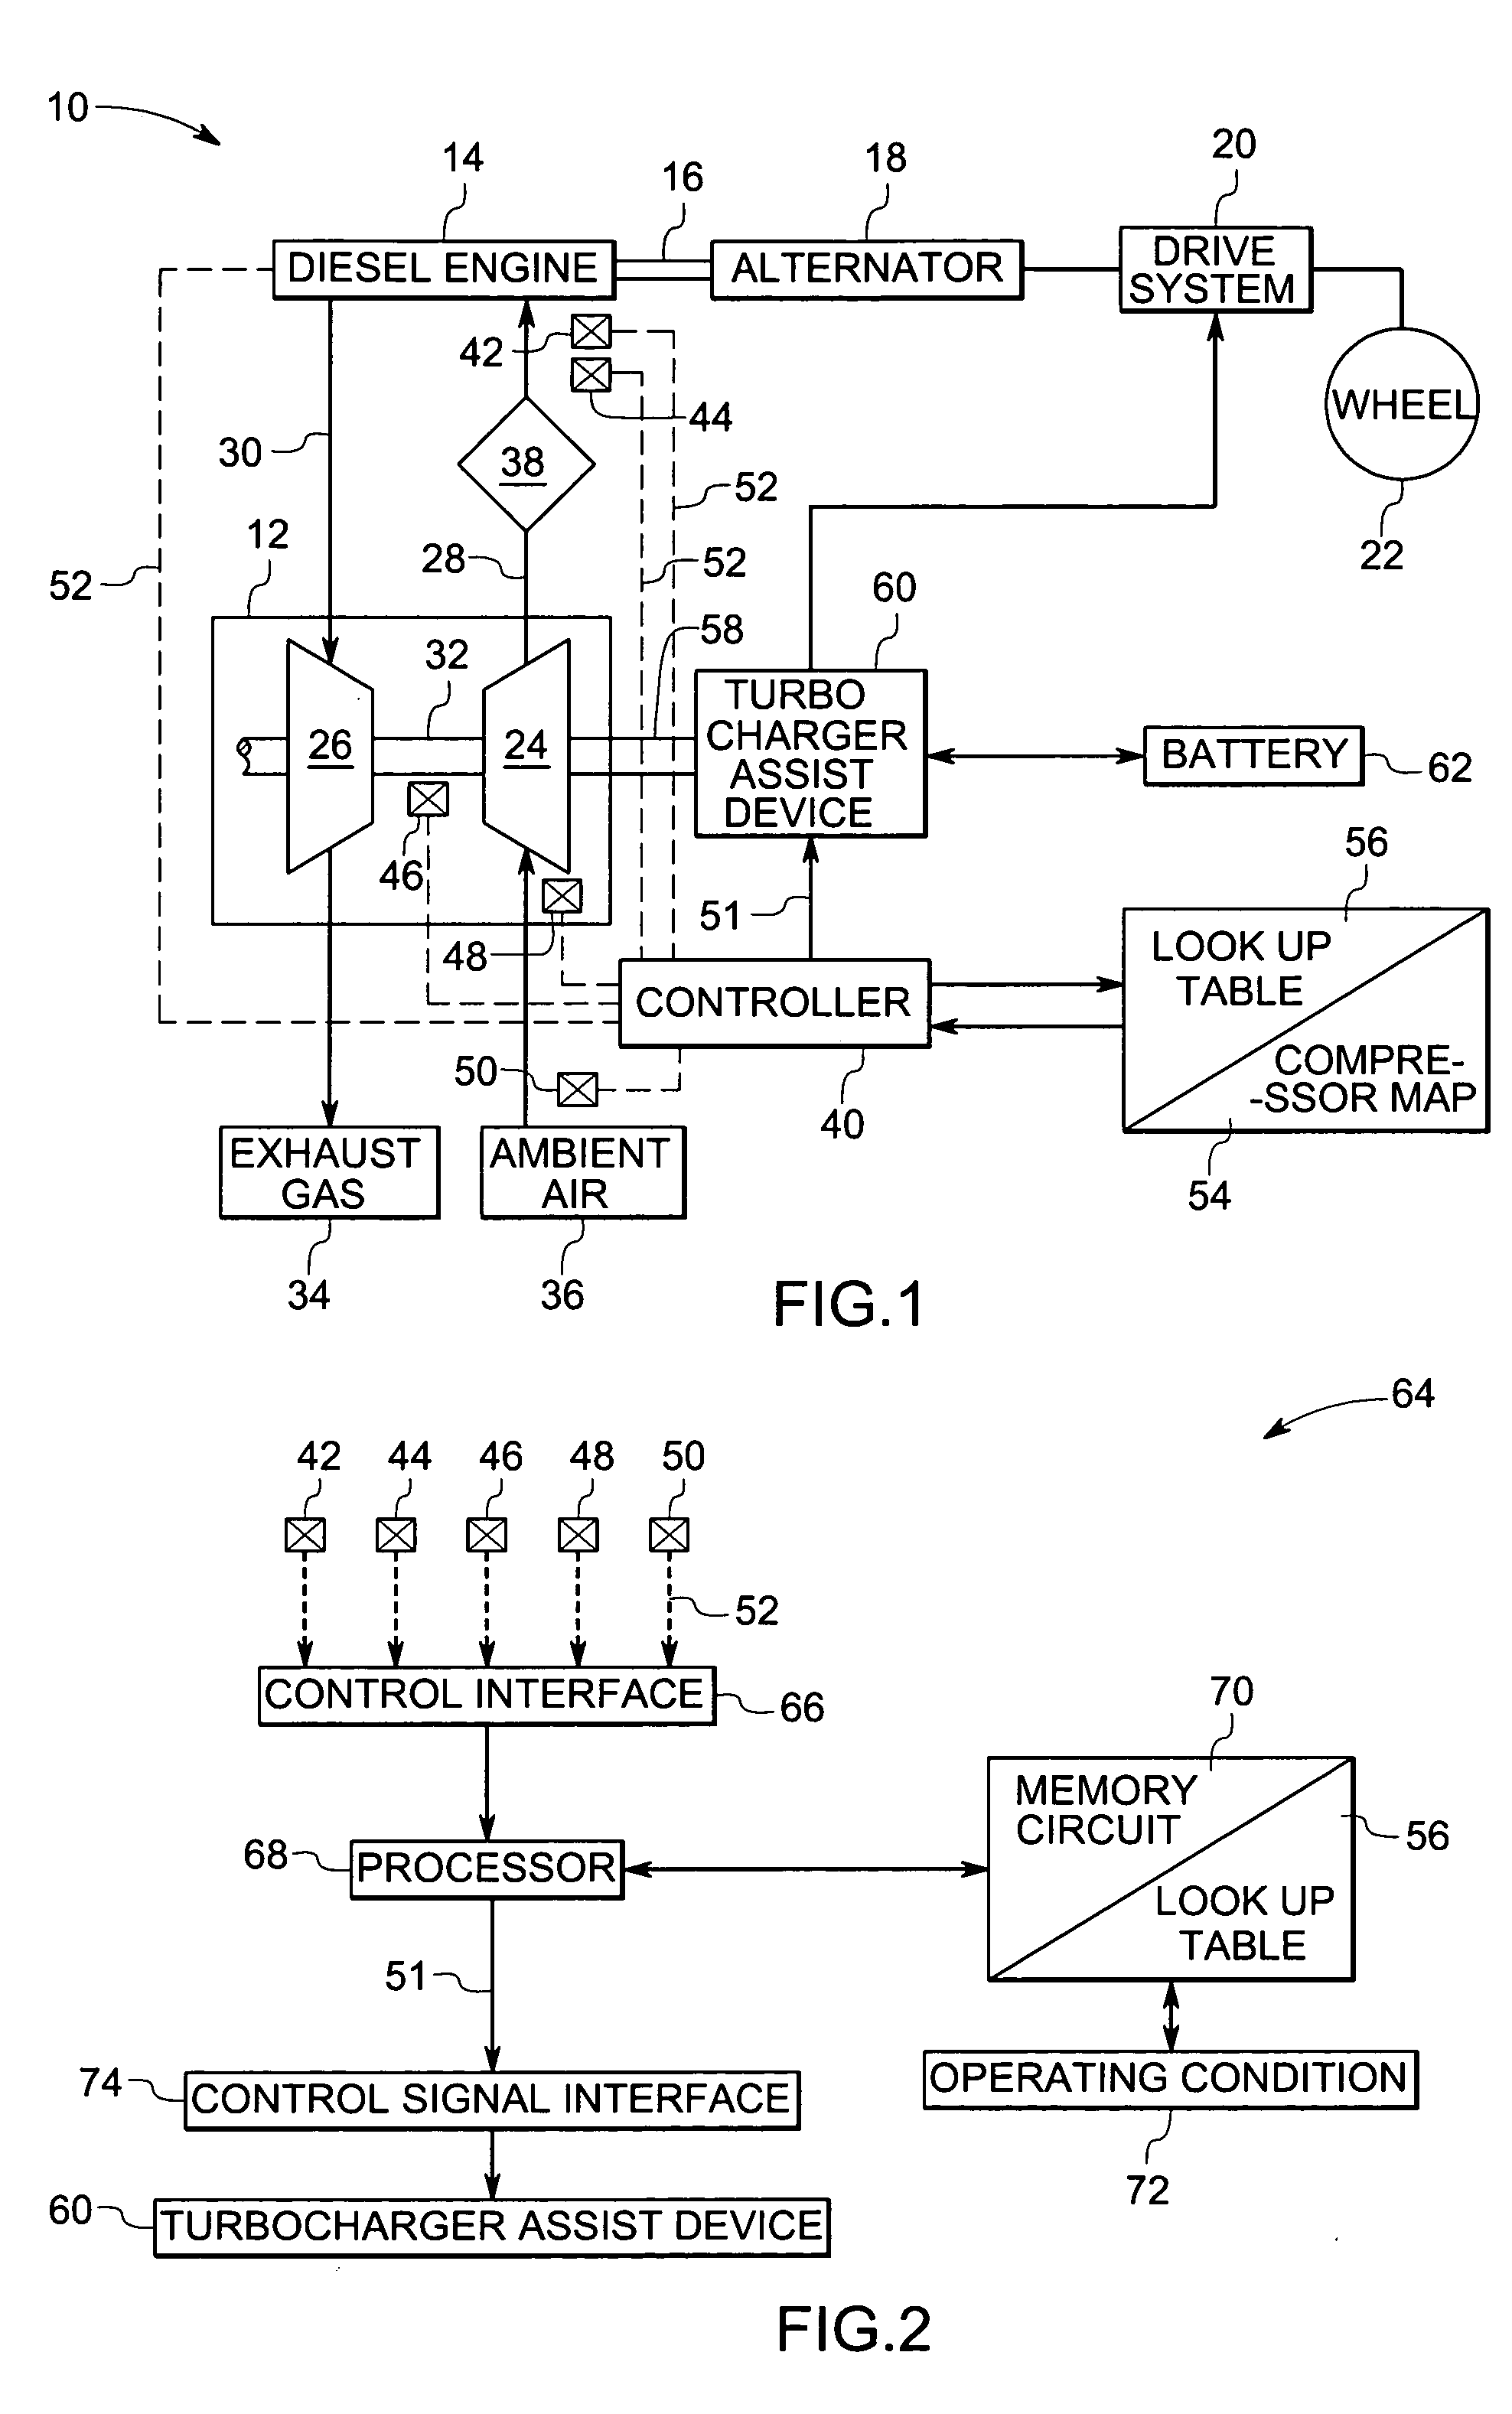 Method and apparatus for actively turbocharging an engine